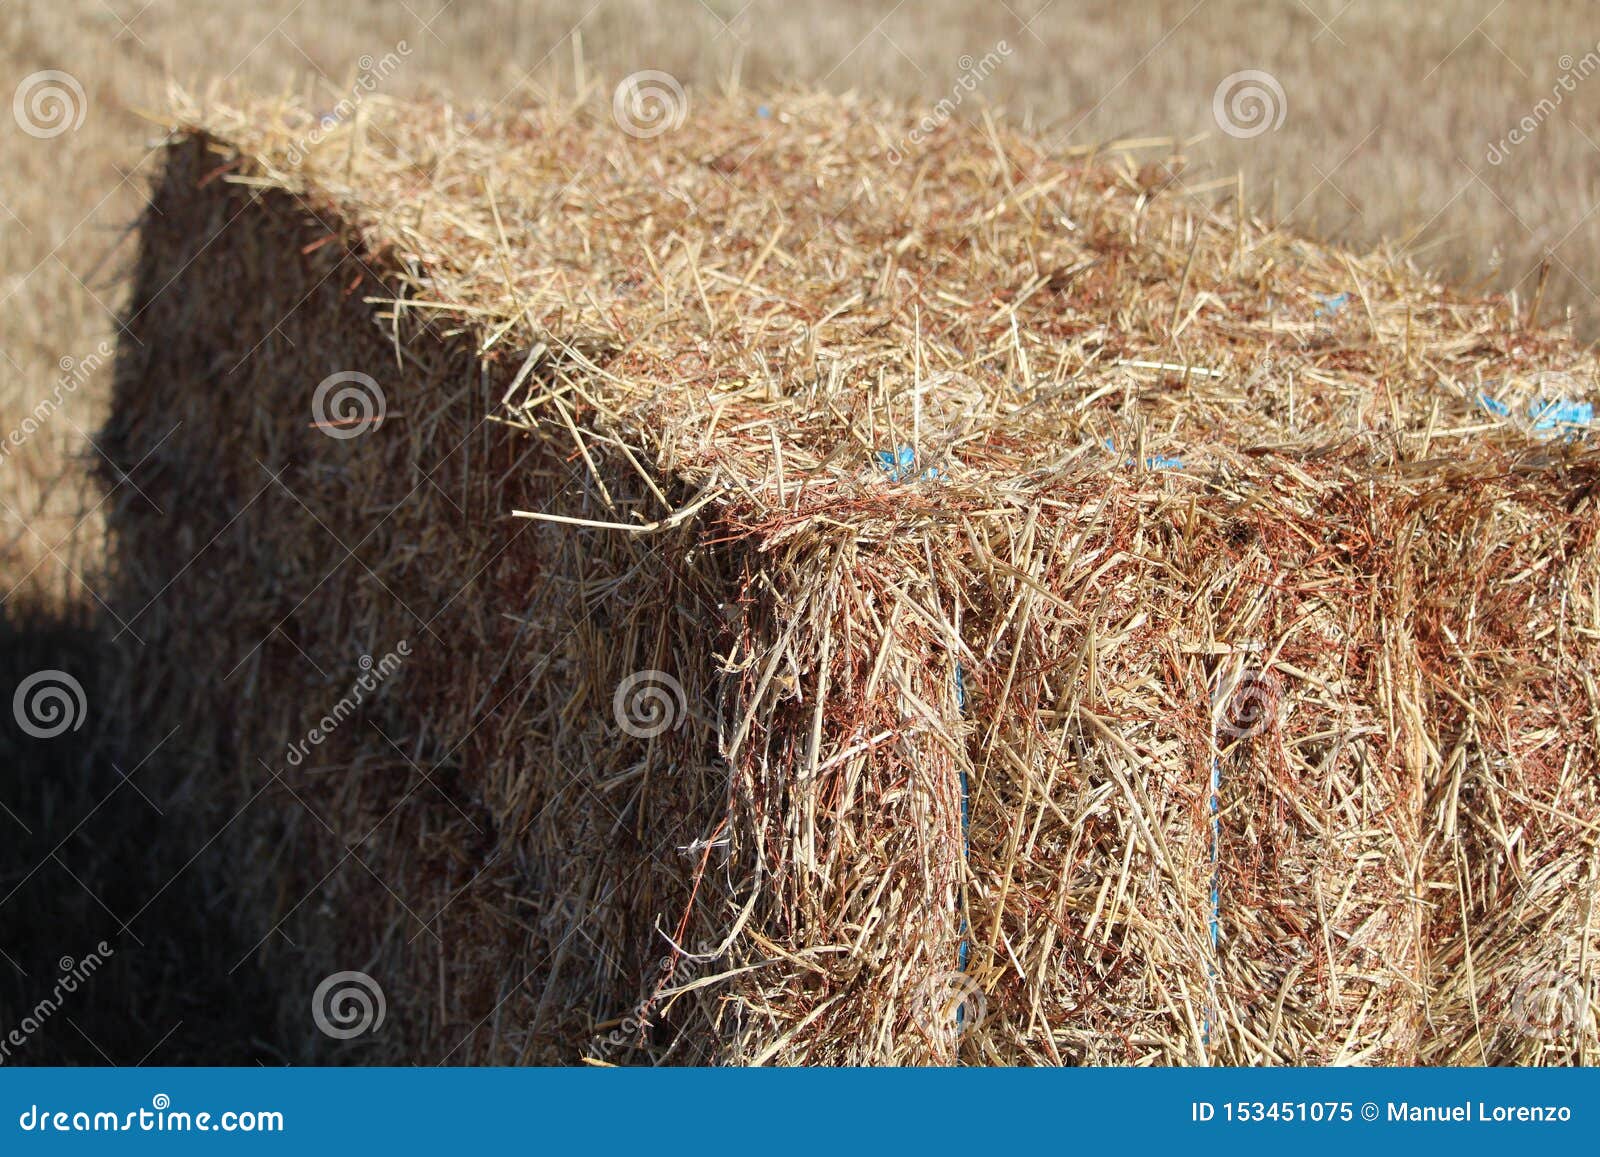 the precious image of a piece of straw ready to be stored